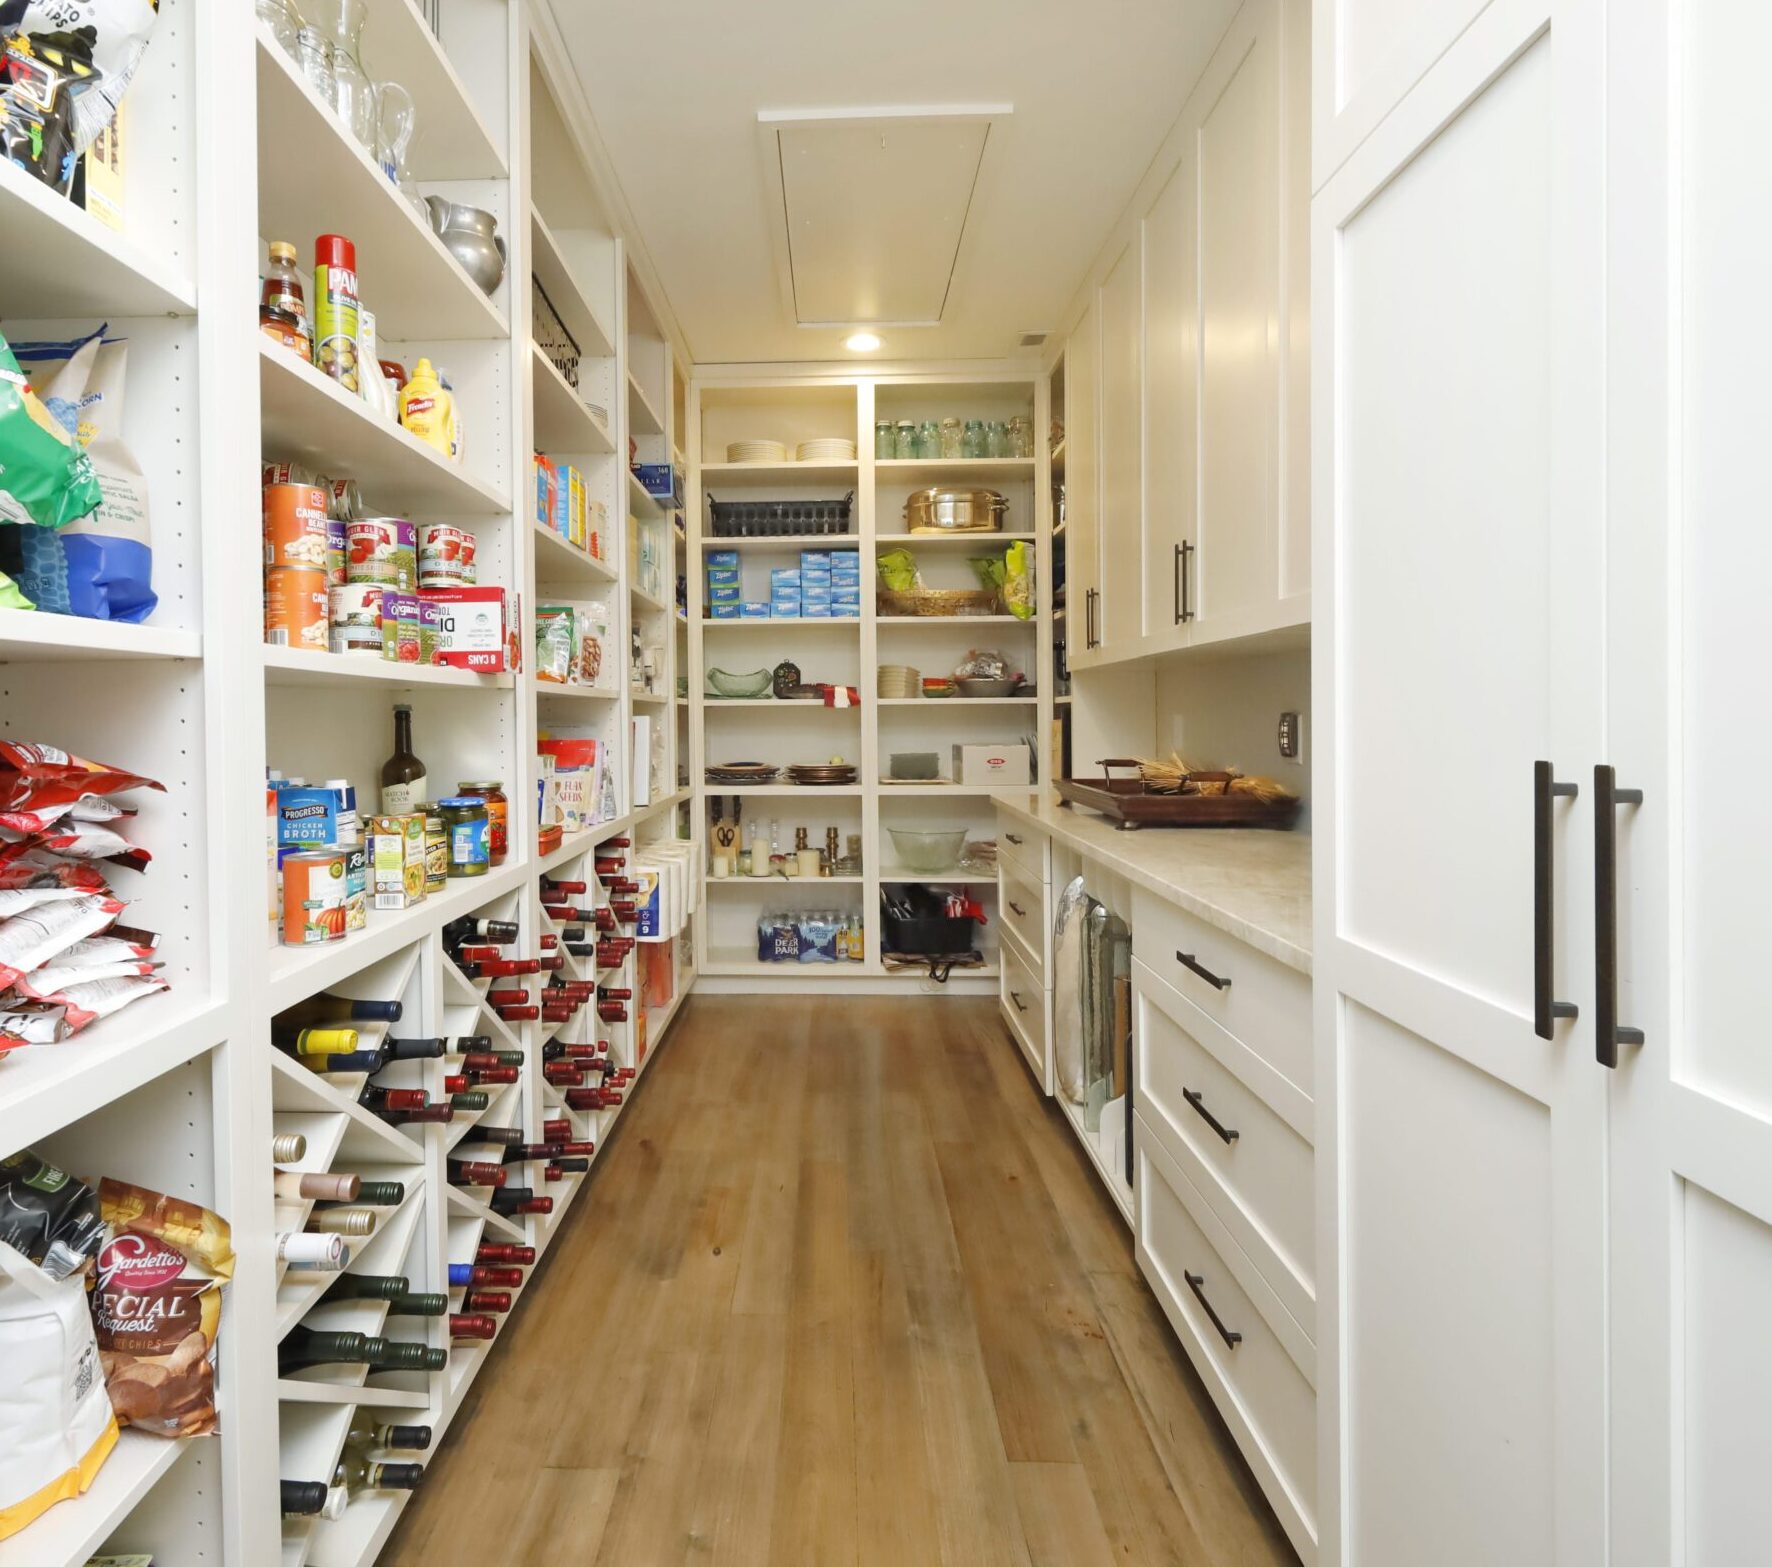 A generous pantry with clean, white built-in storage, wine racks, cabinetry and counter space.